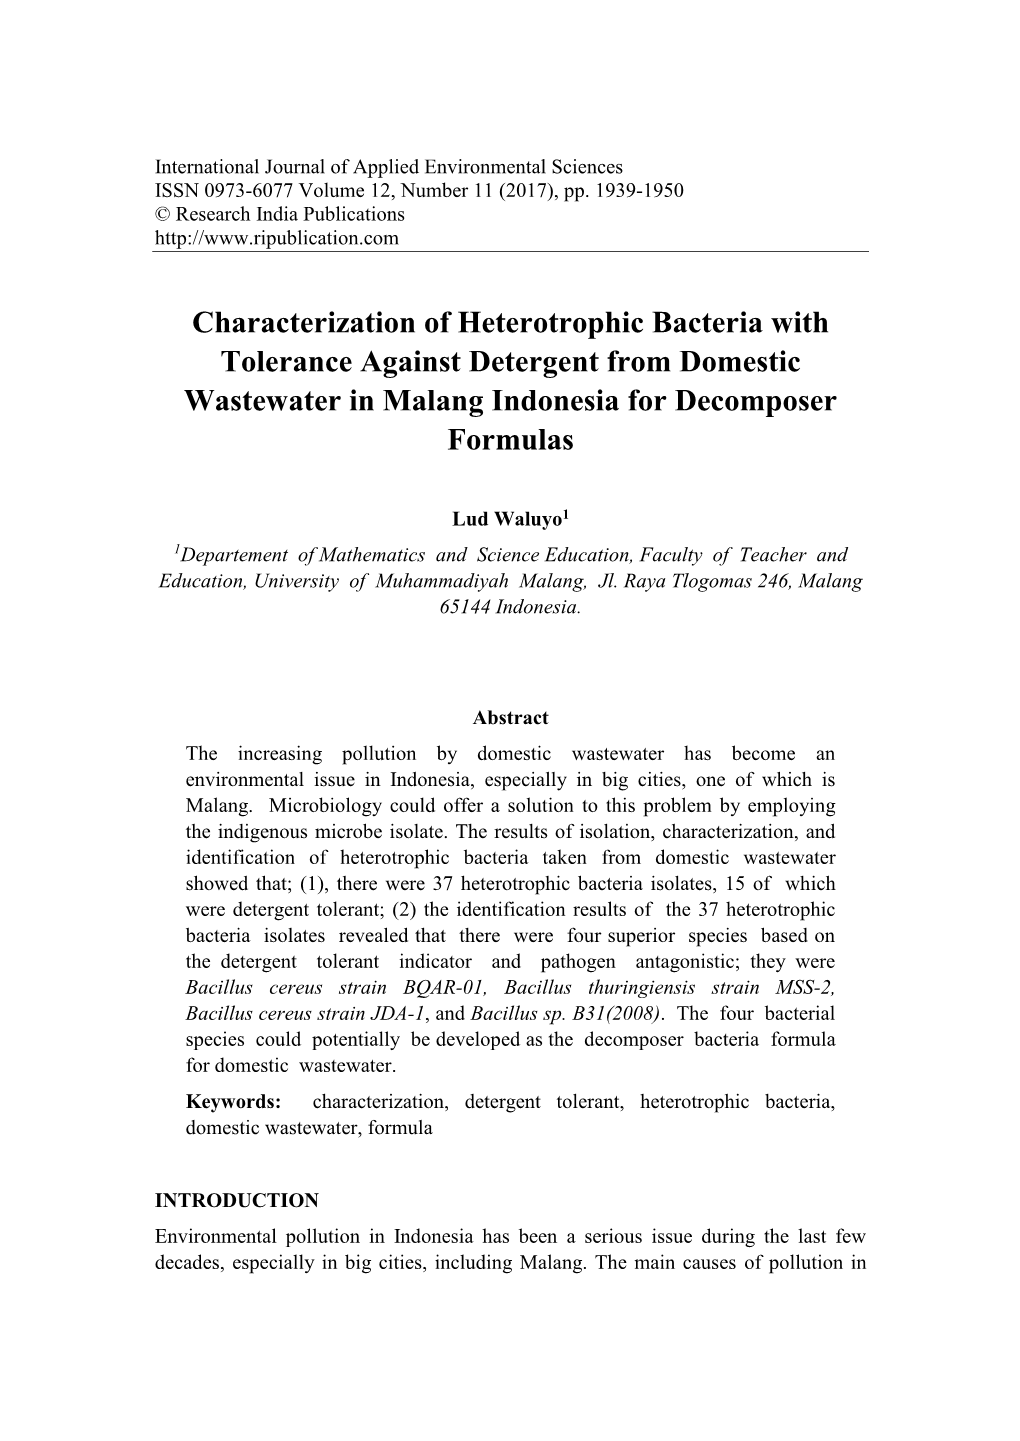 Characterization of Heterotrophic Bacteria with Tolerance Against Detergent from Domestic Wastewater in Malang Indonesia for Decomposer Formulas